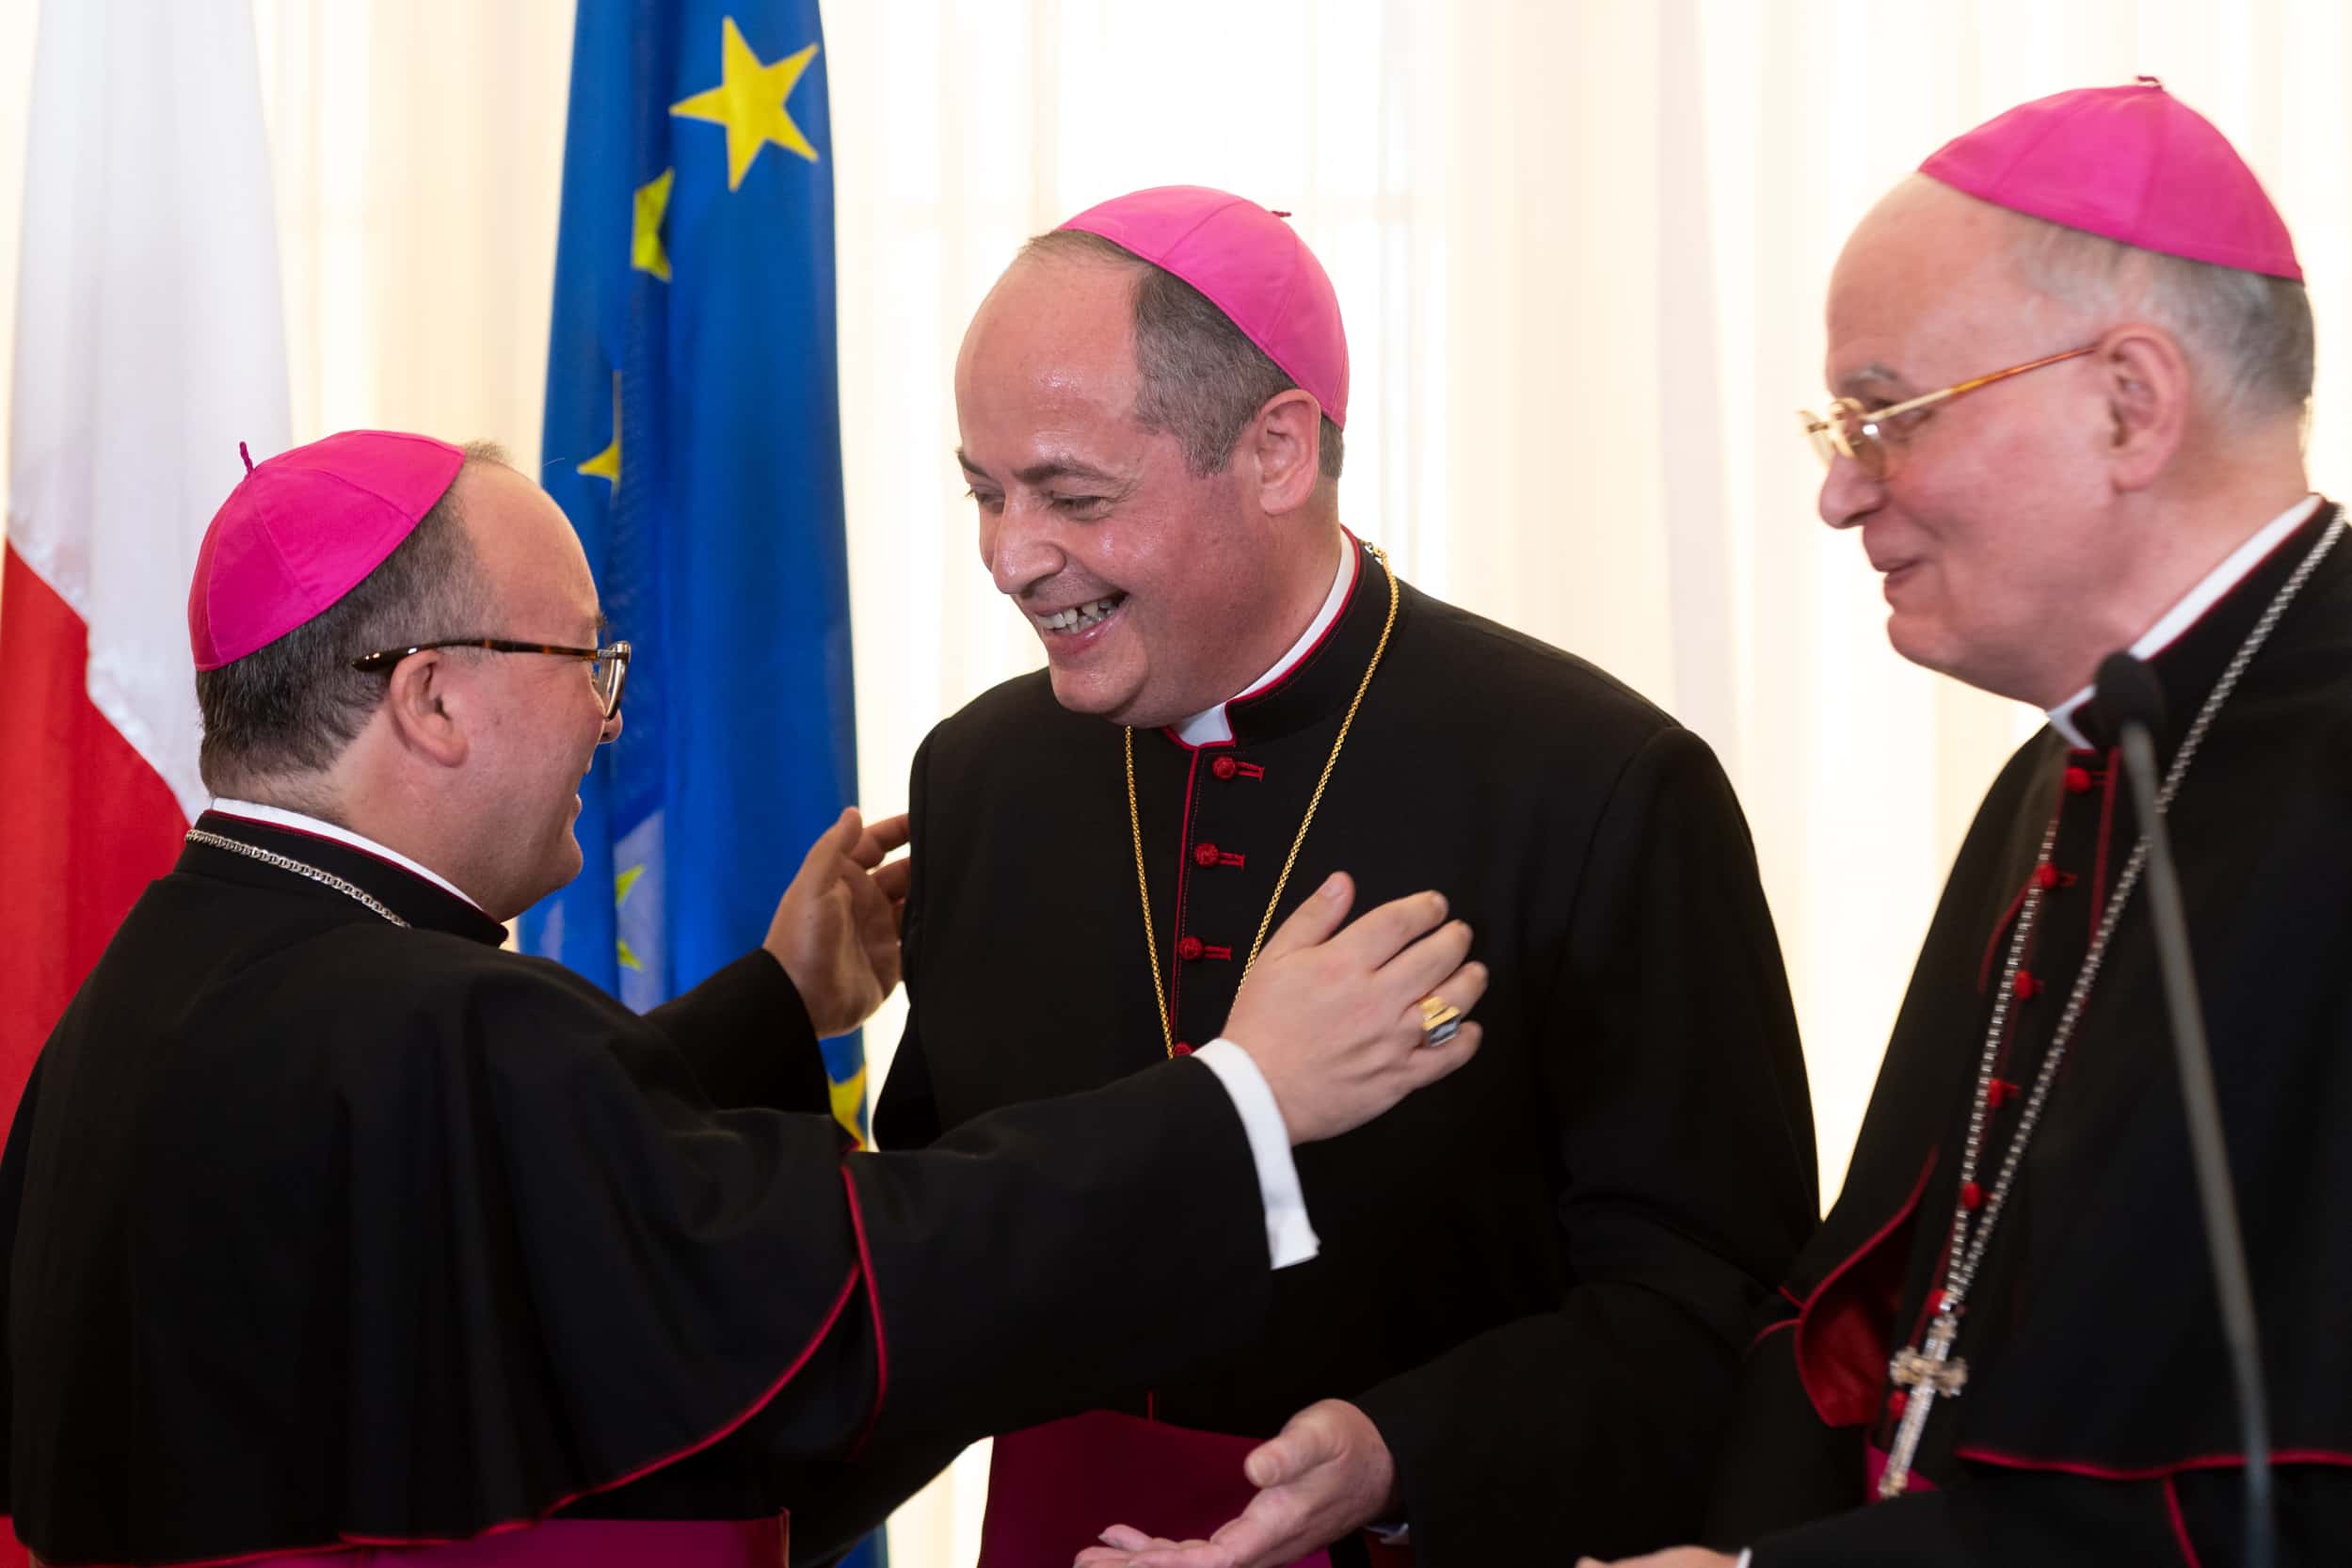 New auxiliary bishop of Malta assigned by the Pope himself.